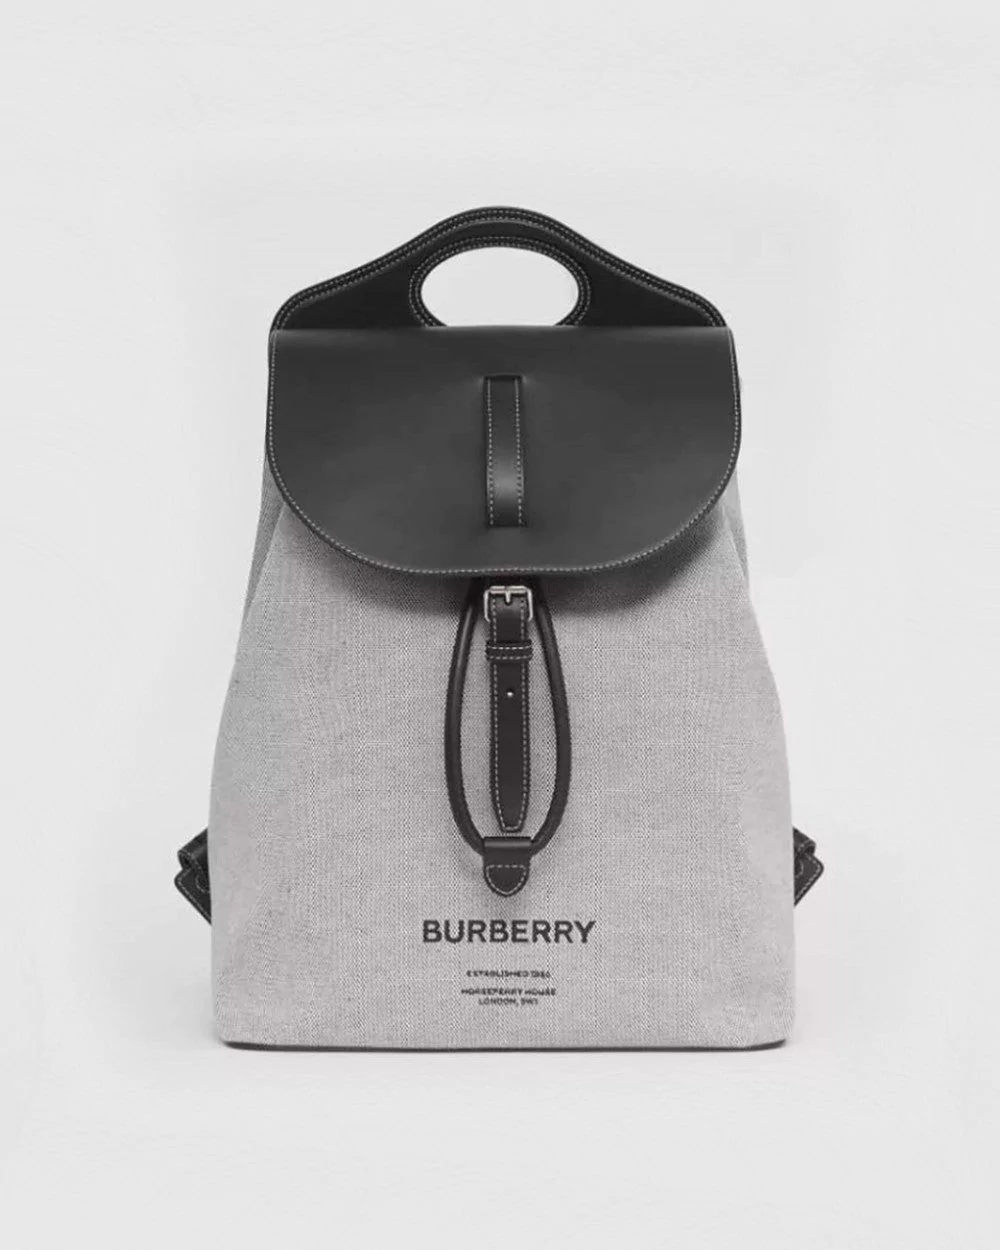 Burberry Horseferry Print Canvas and Leather Pocket Backpack